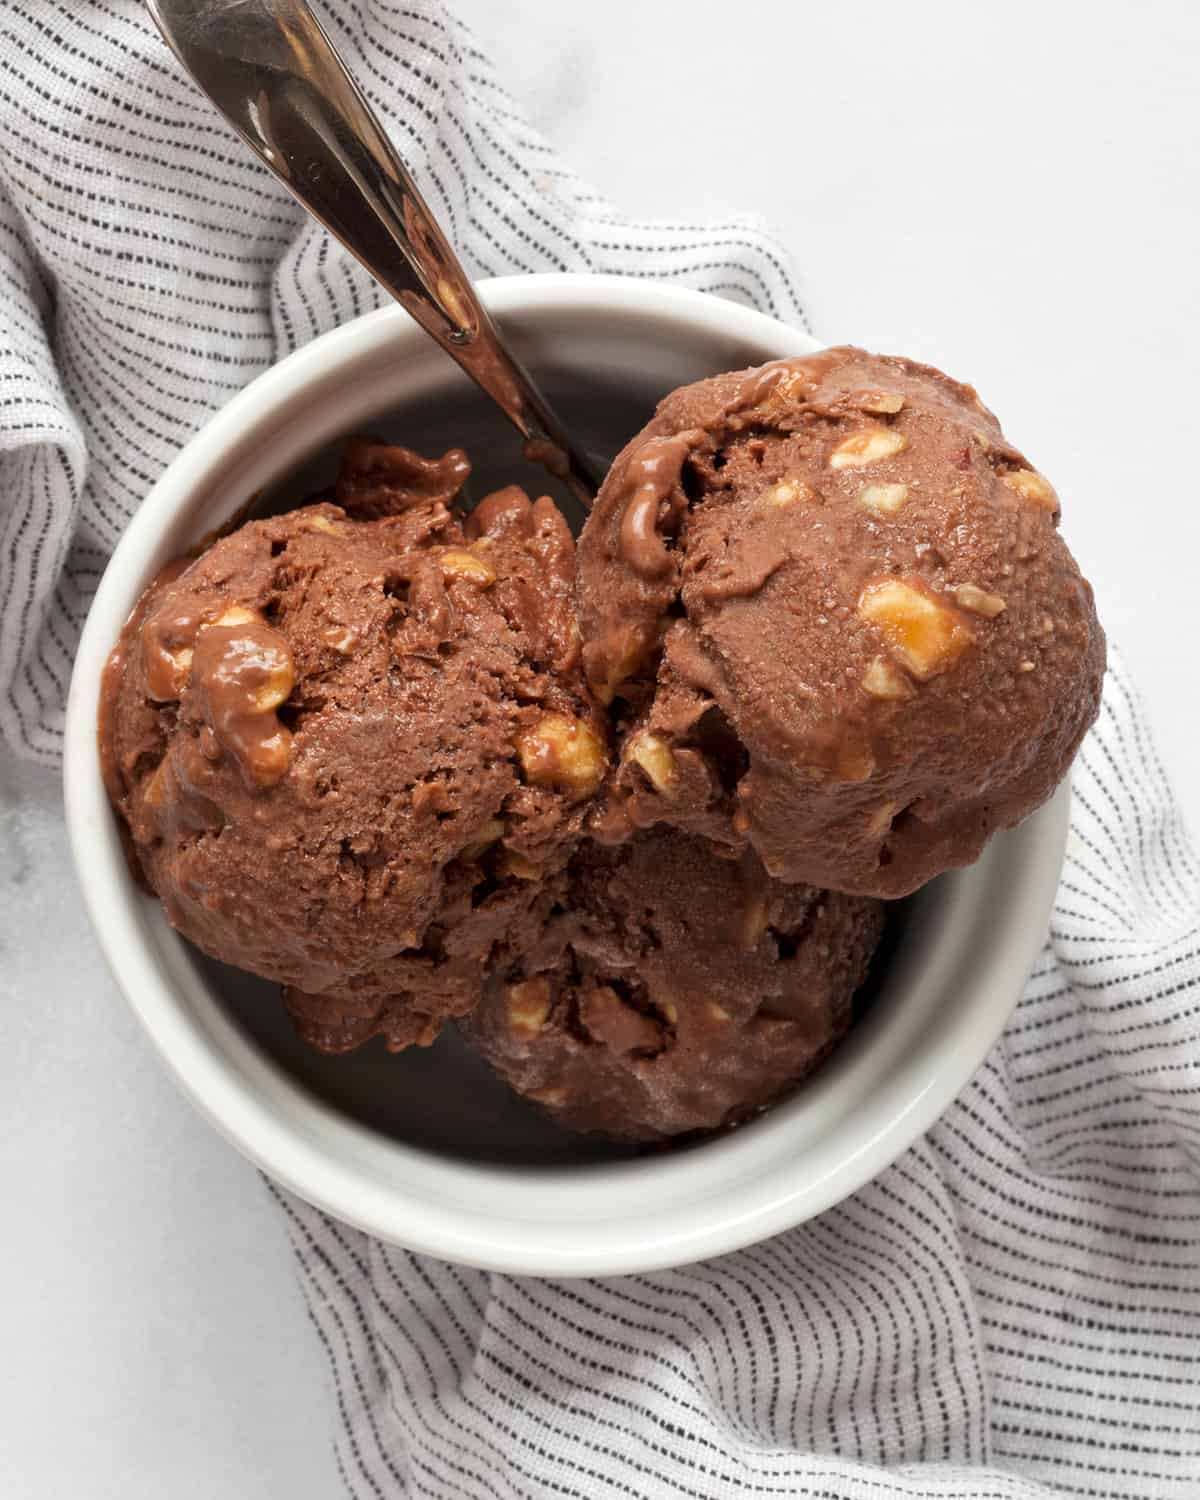 Vegan chocolate ice cream in a bowl with a spoon.